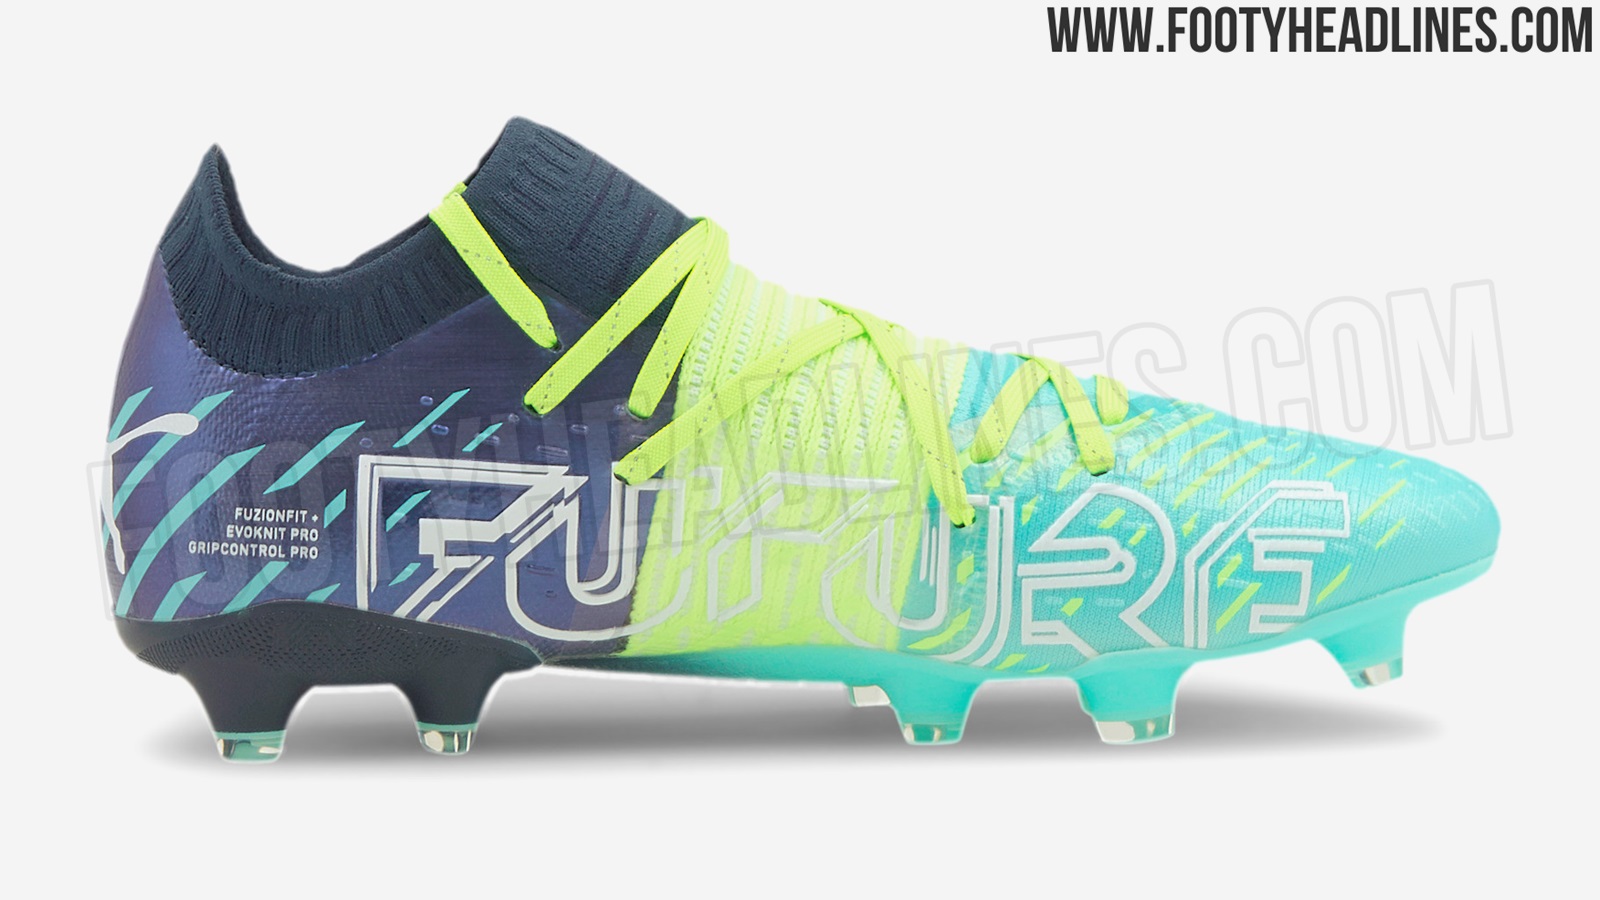 Puma Future Z 2021 'Under The Lights' Boots Leaked - Footy Headlines